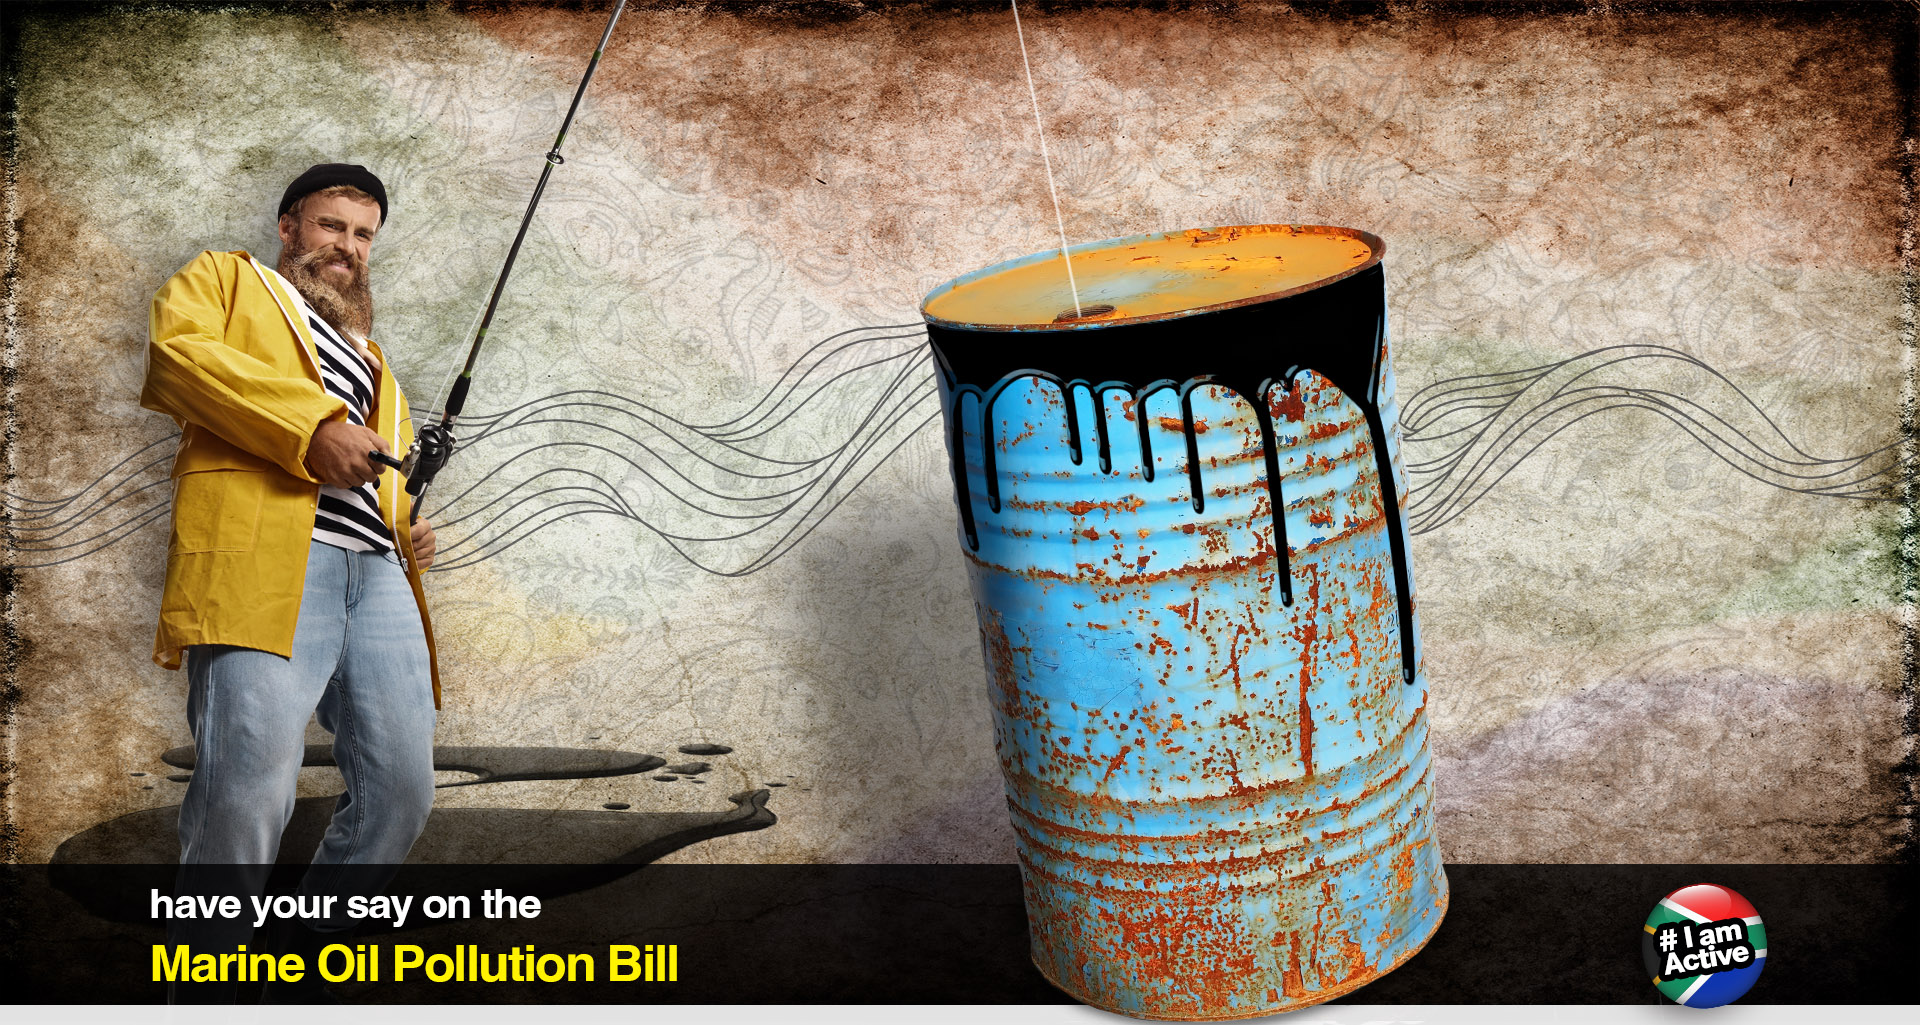 Have your say on the Marine Oil Pollution Bill